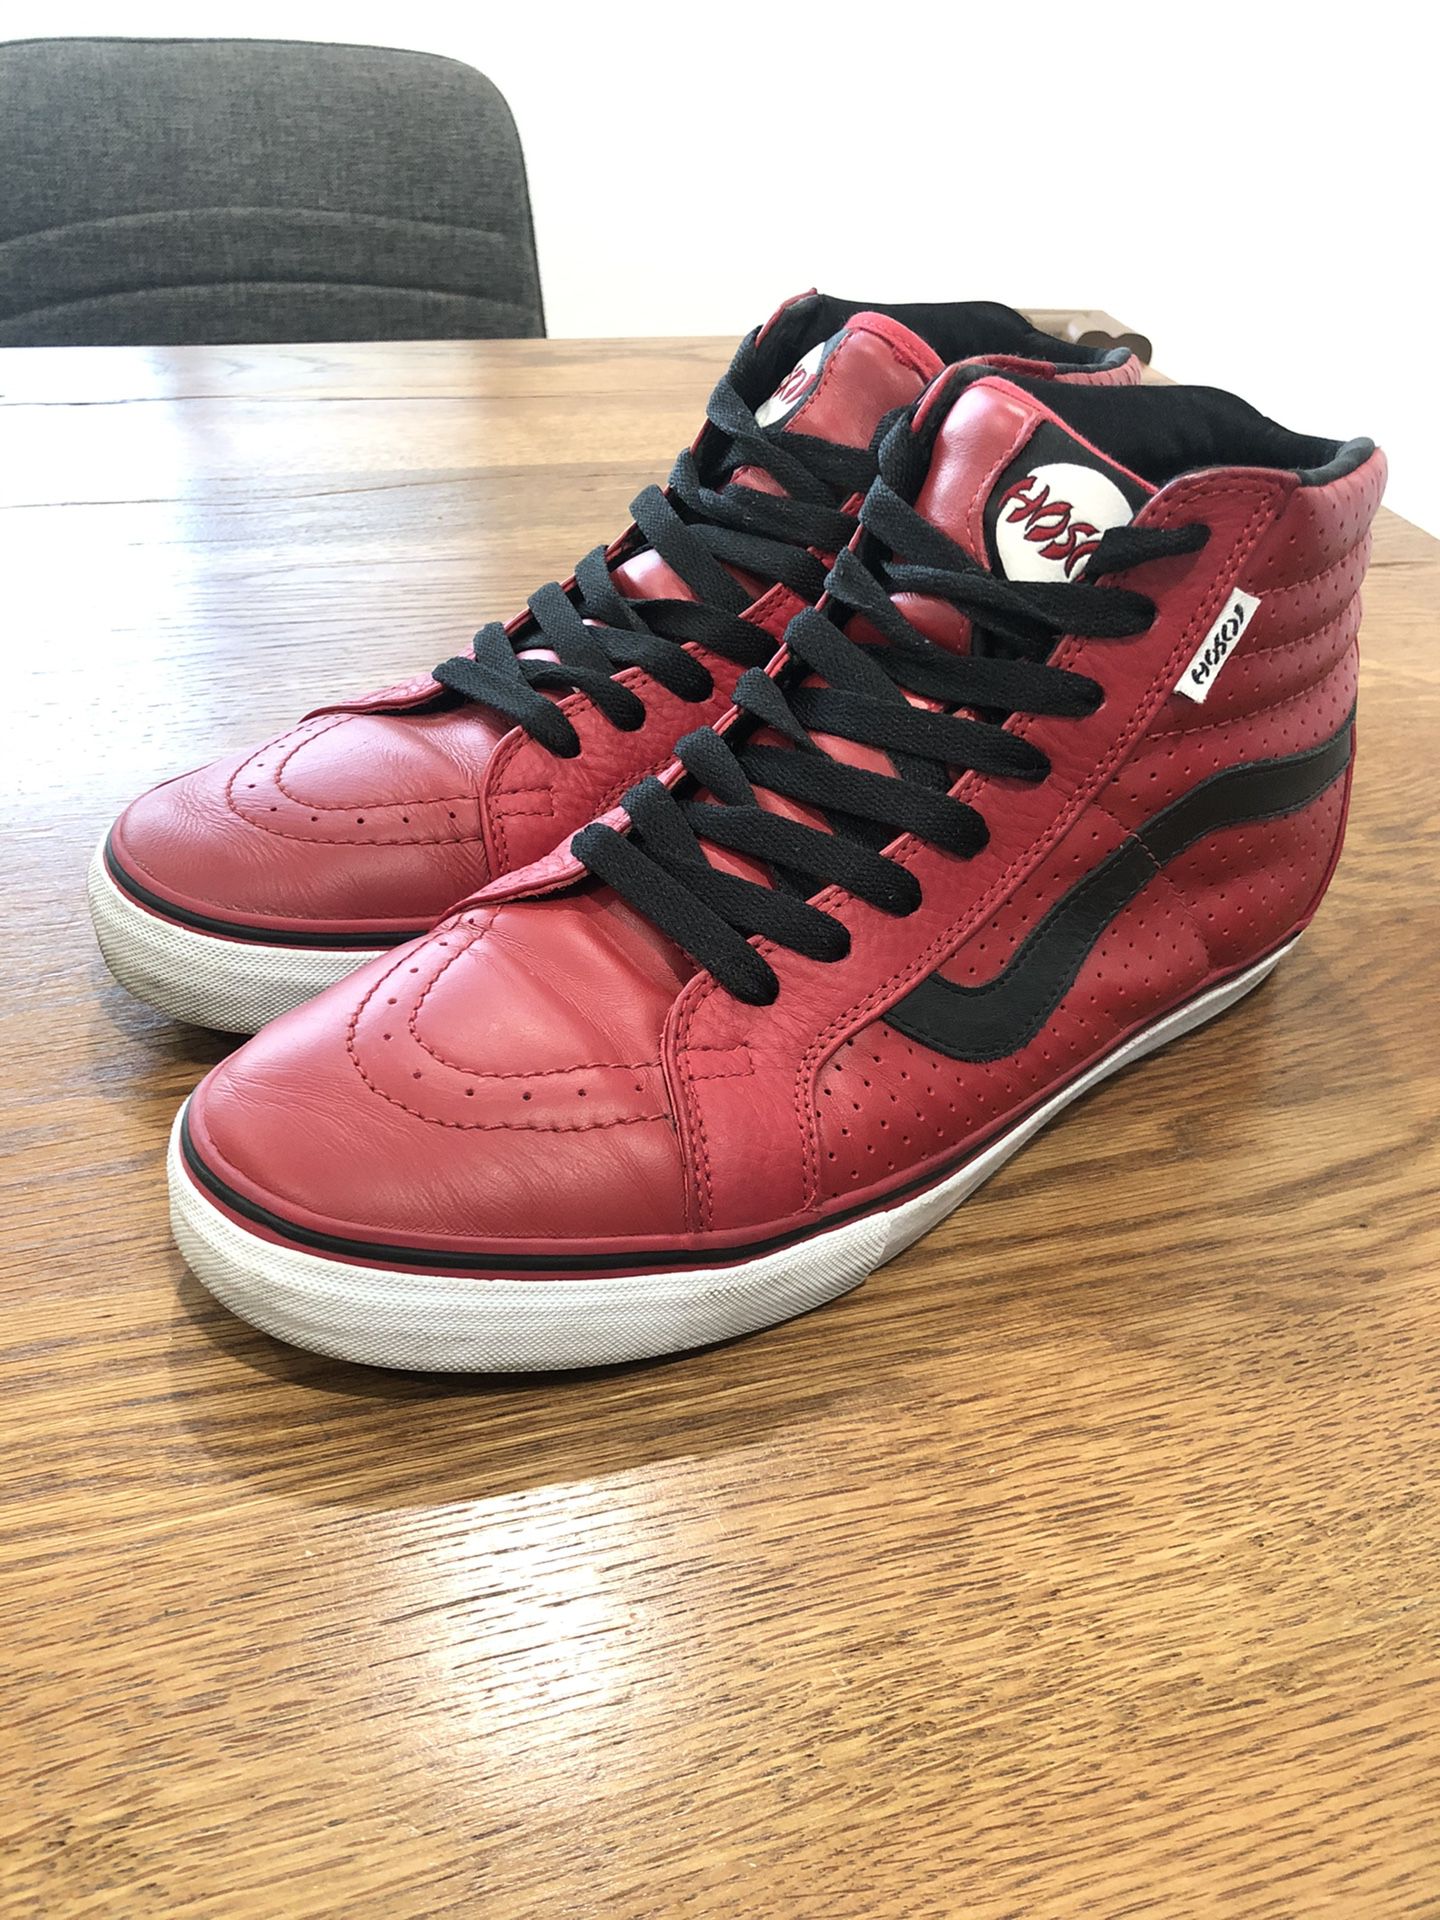 Vans Hosoi High Leather RED